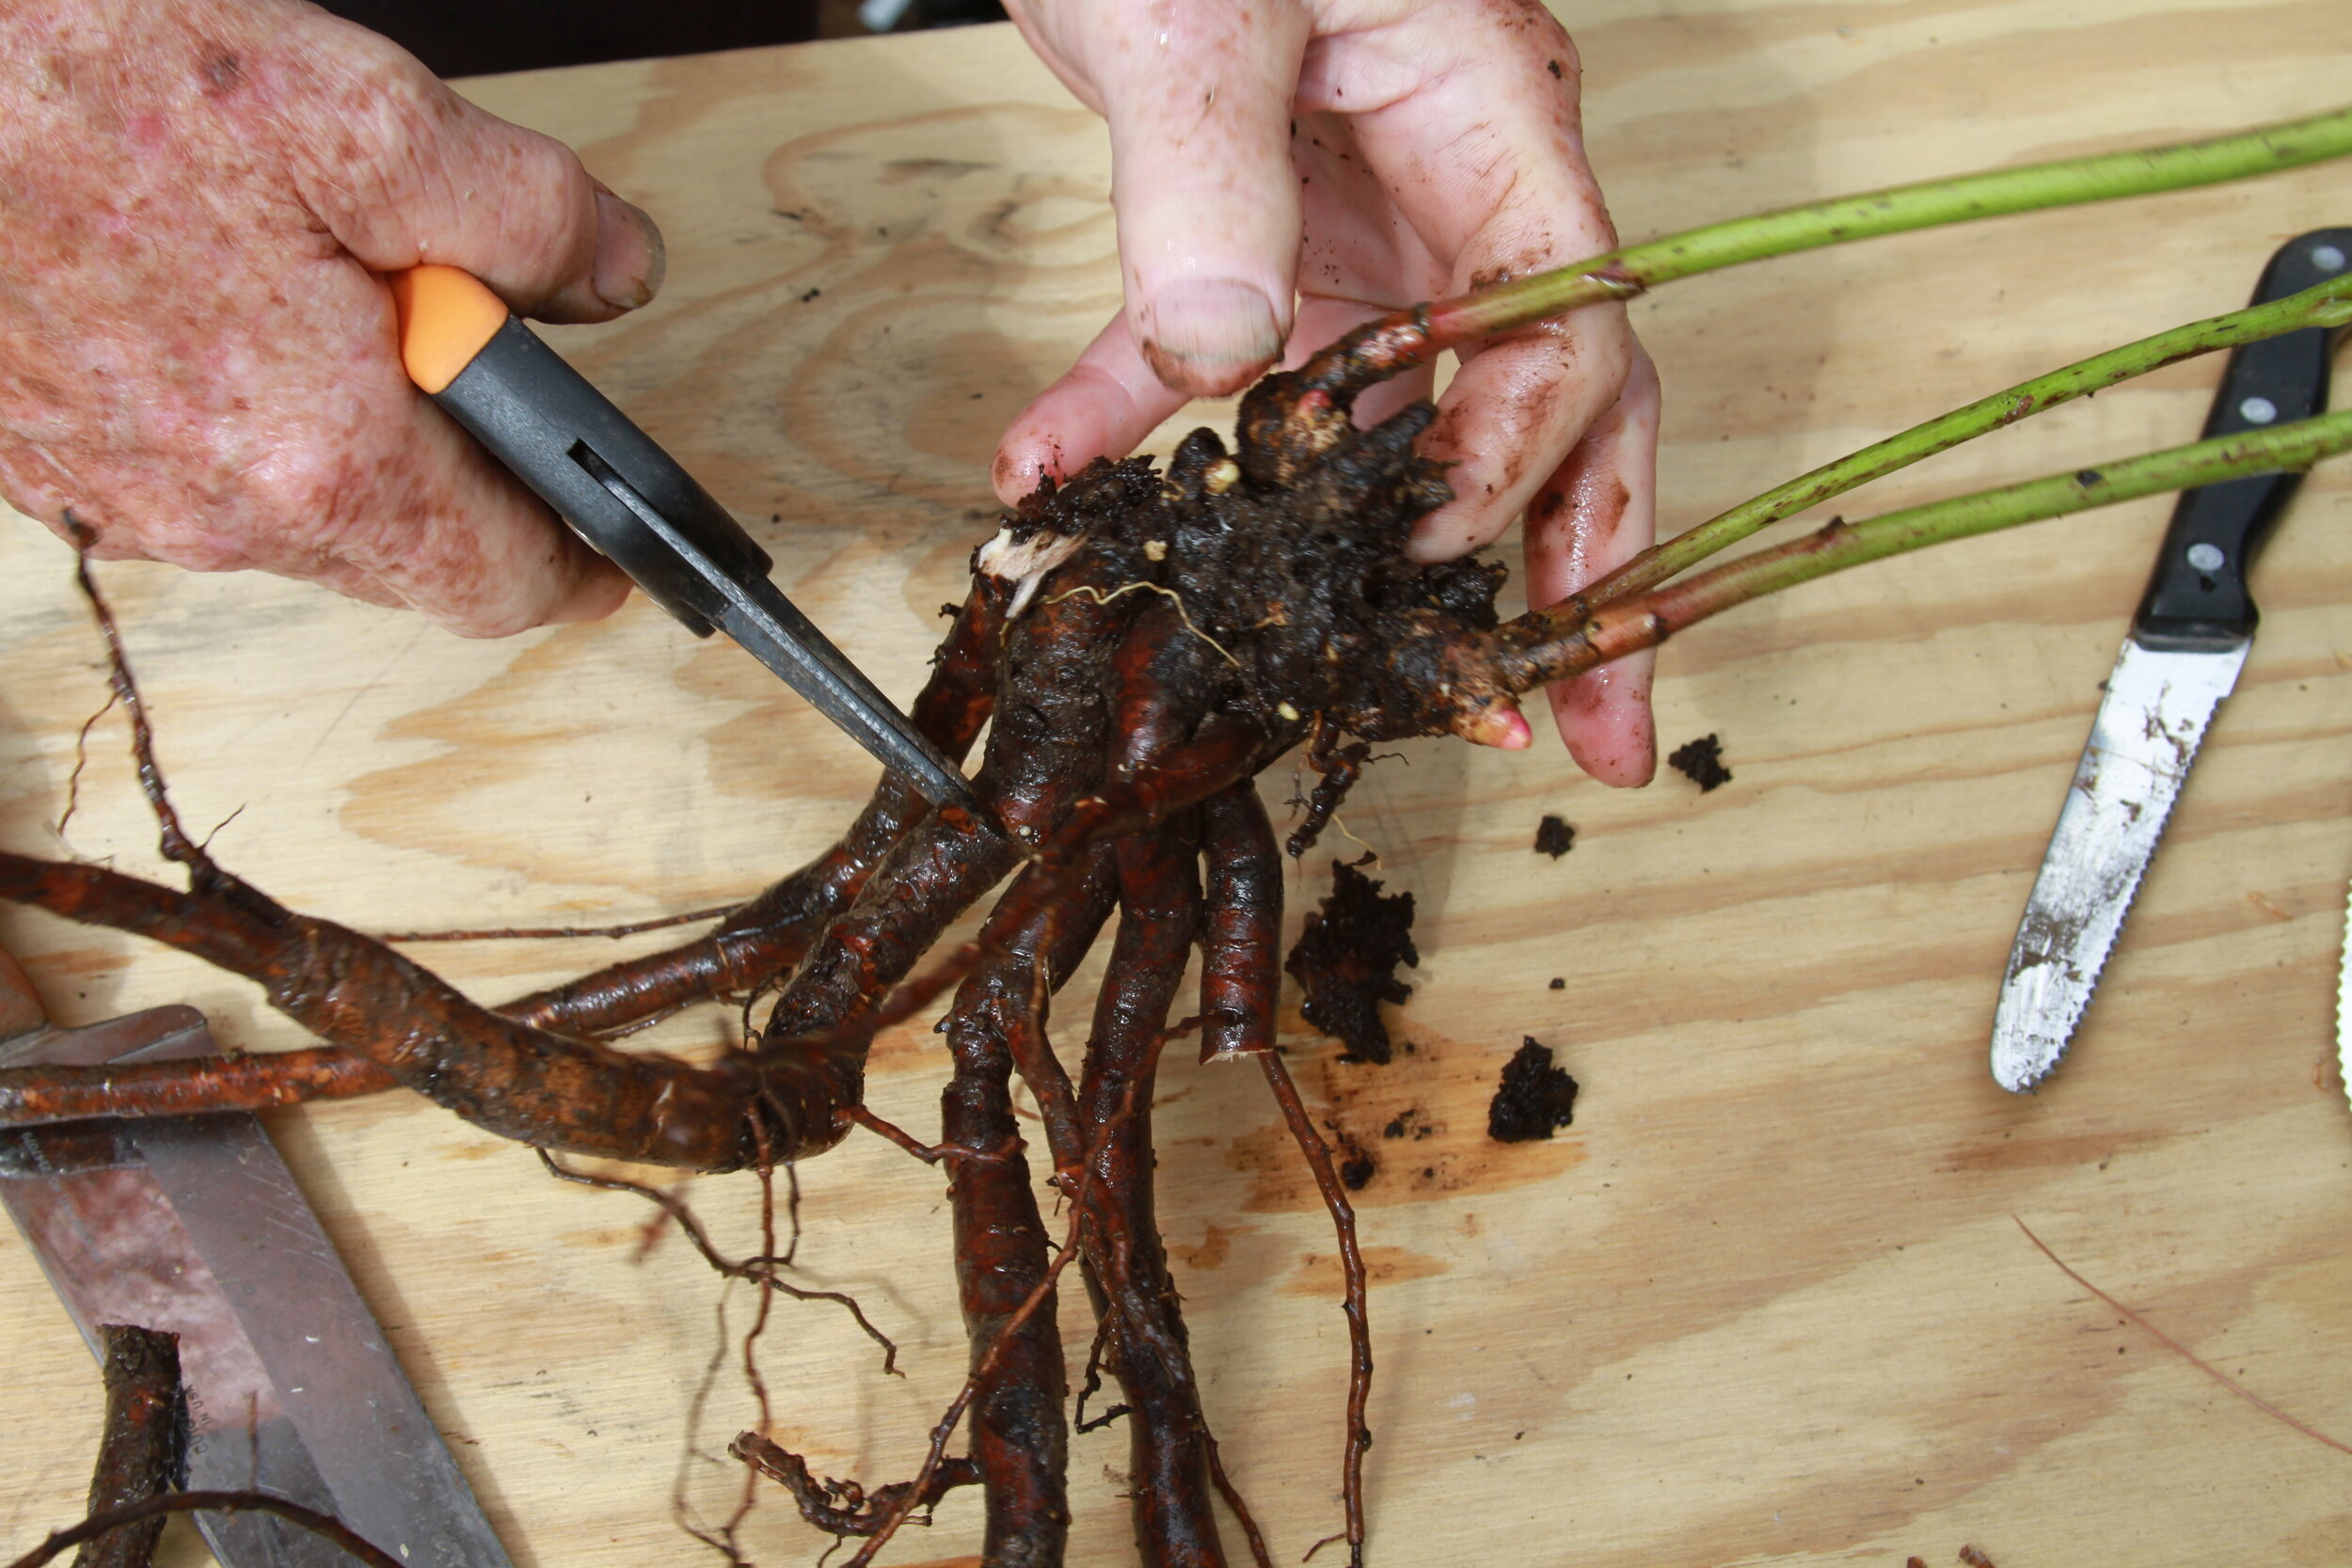 Selecting Herbaceous Nurse Roots